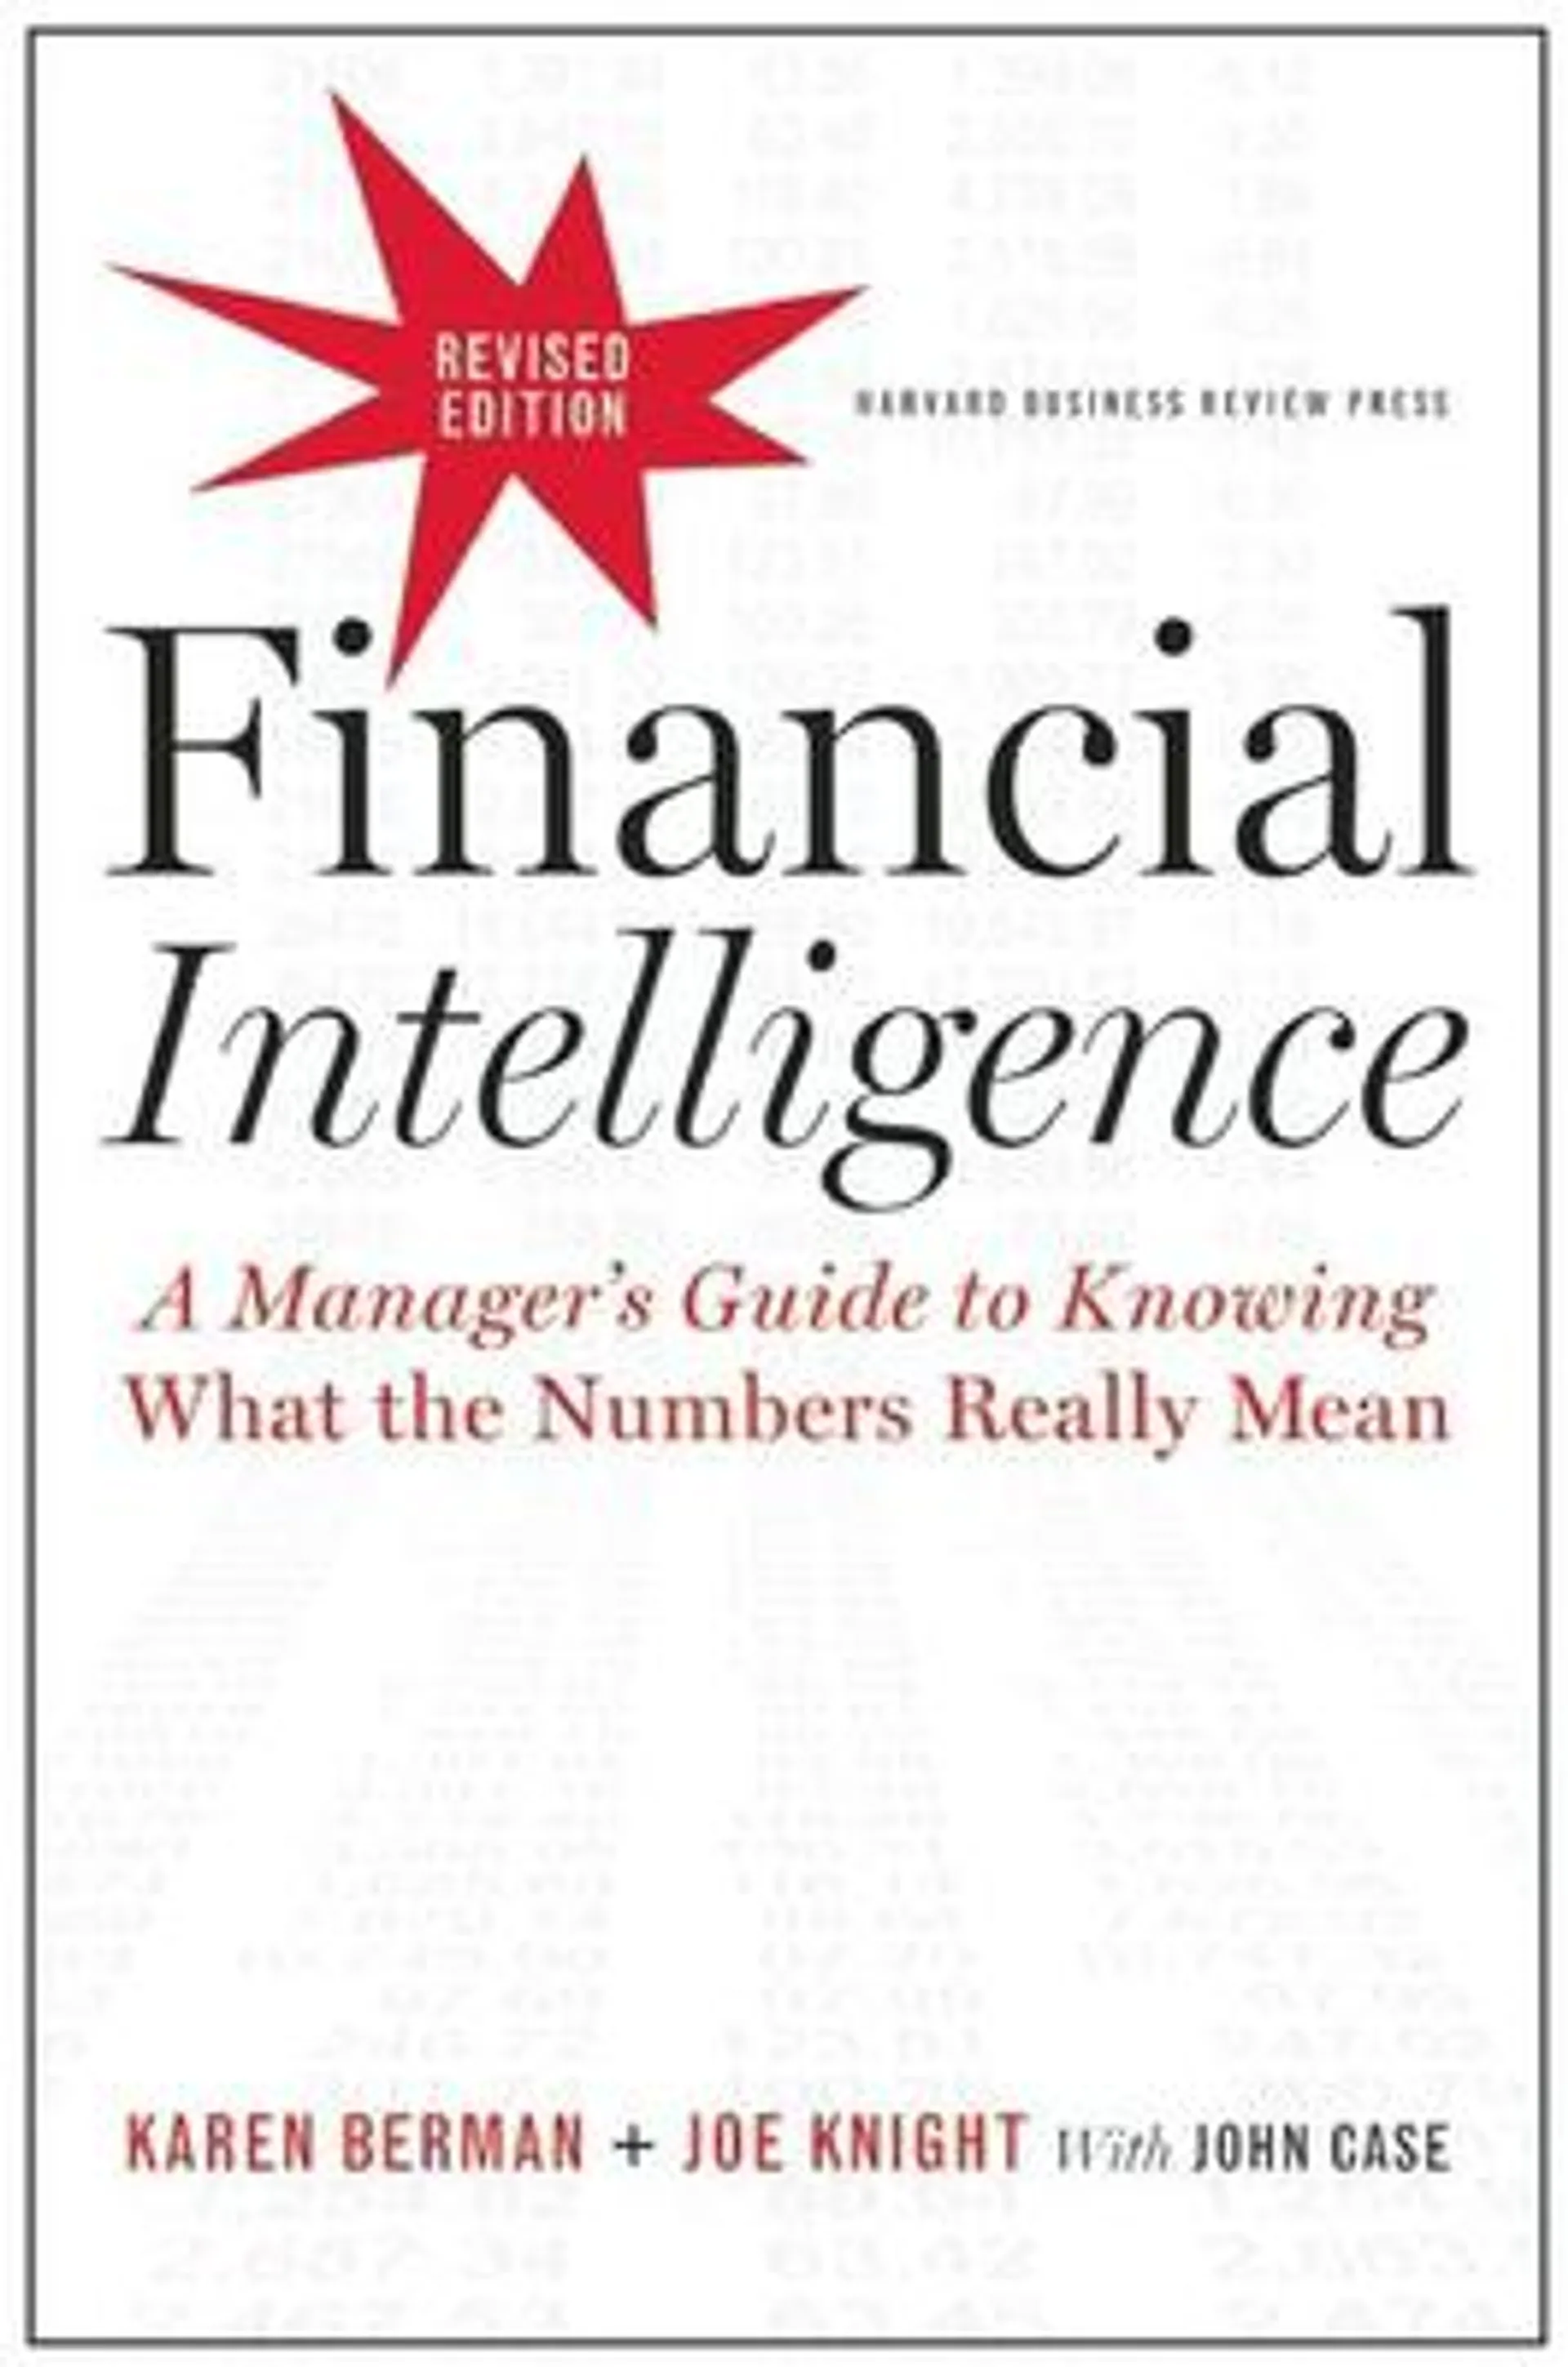 Financial Intelligence: A Manager's Guide to Knowing What the Numbers Really Mean (Revised edition)